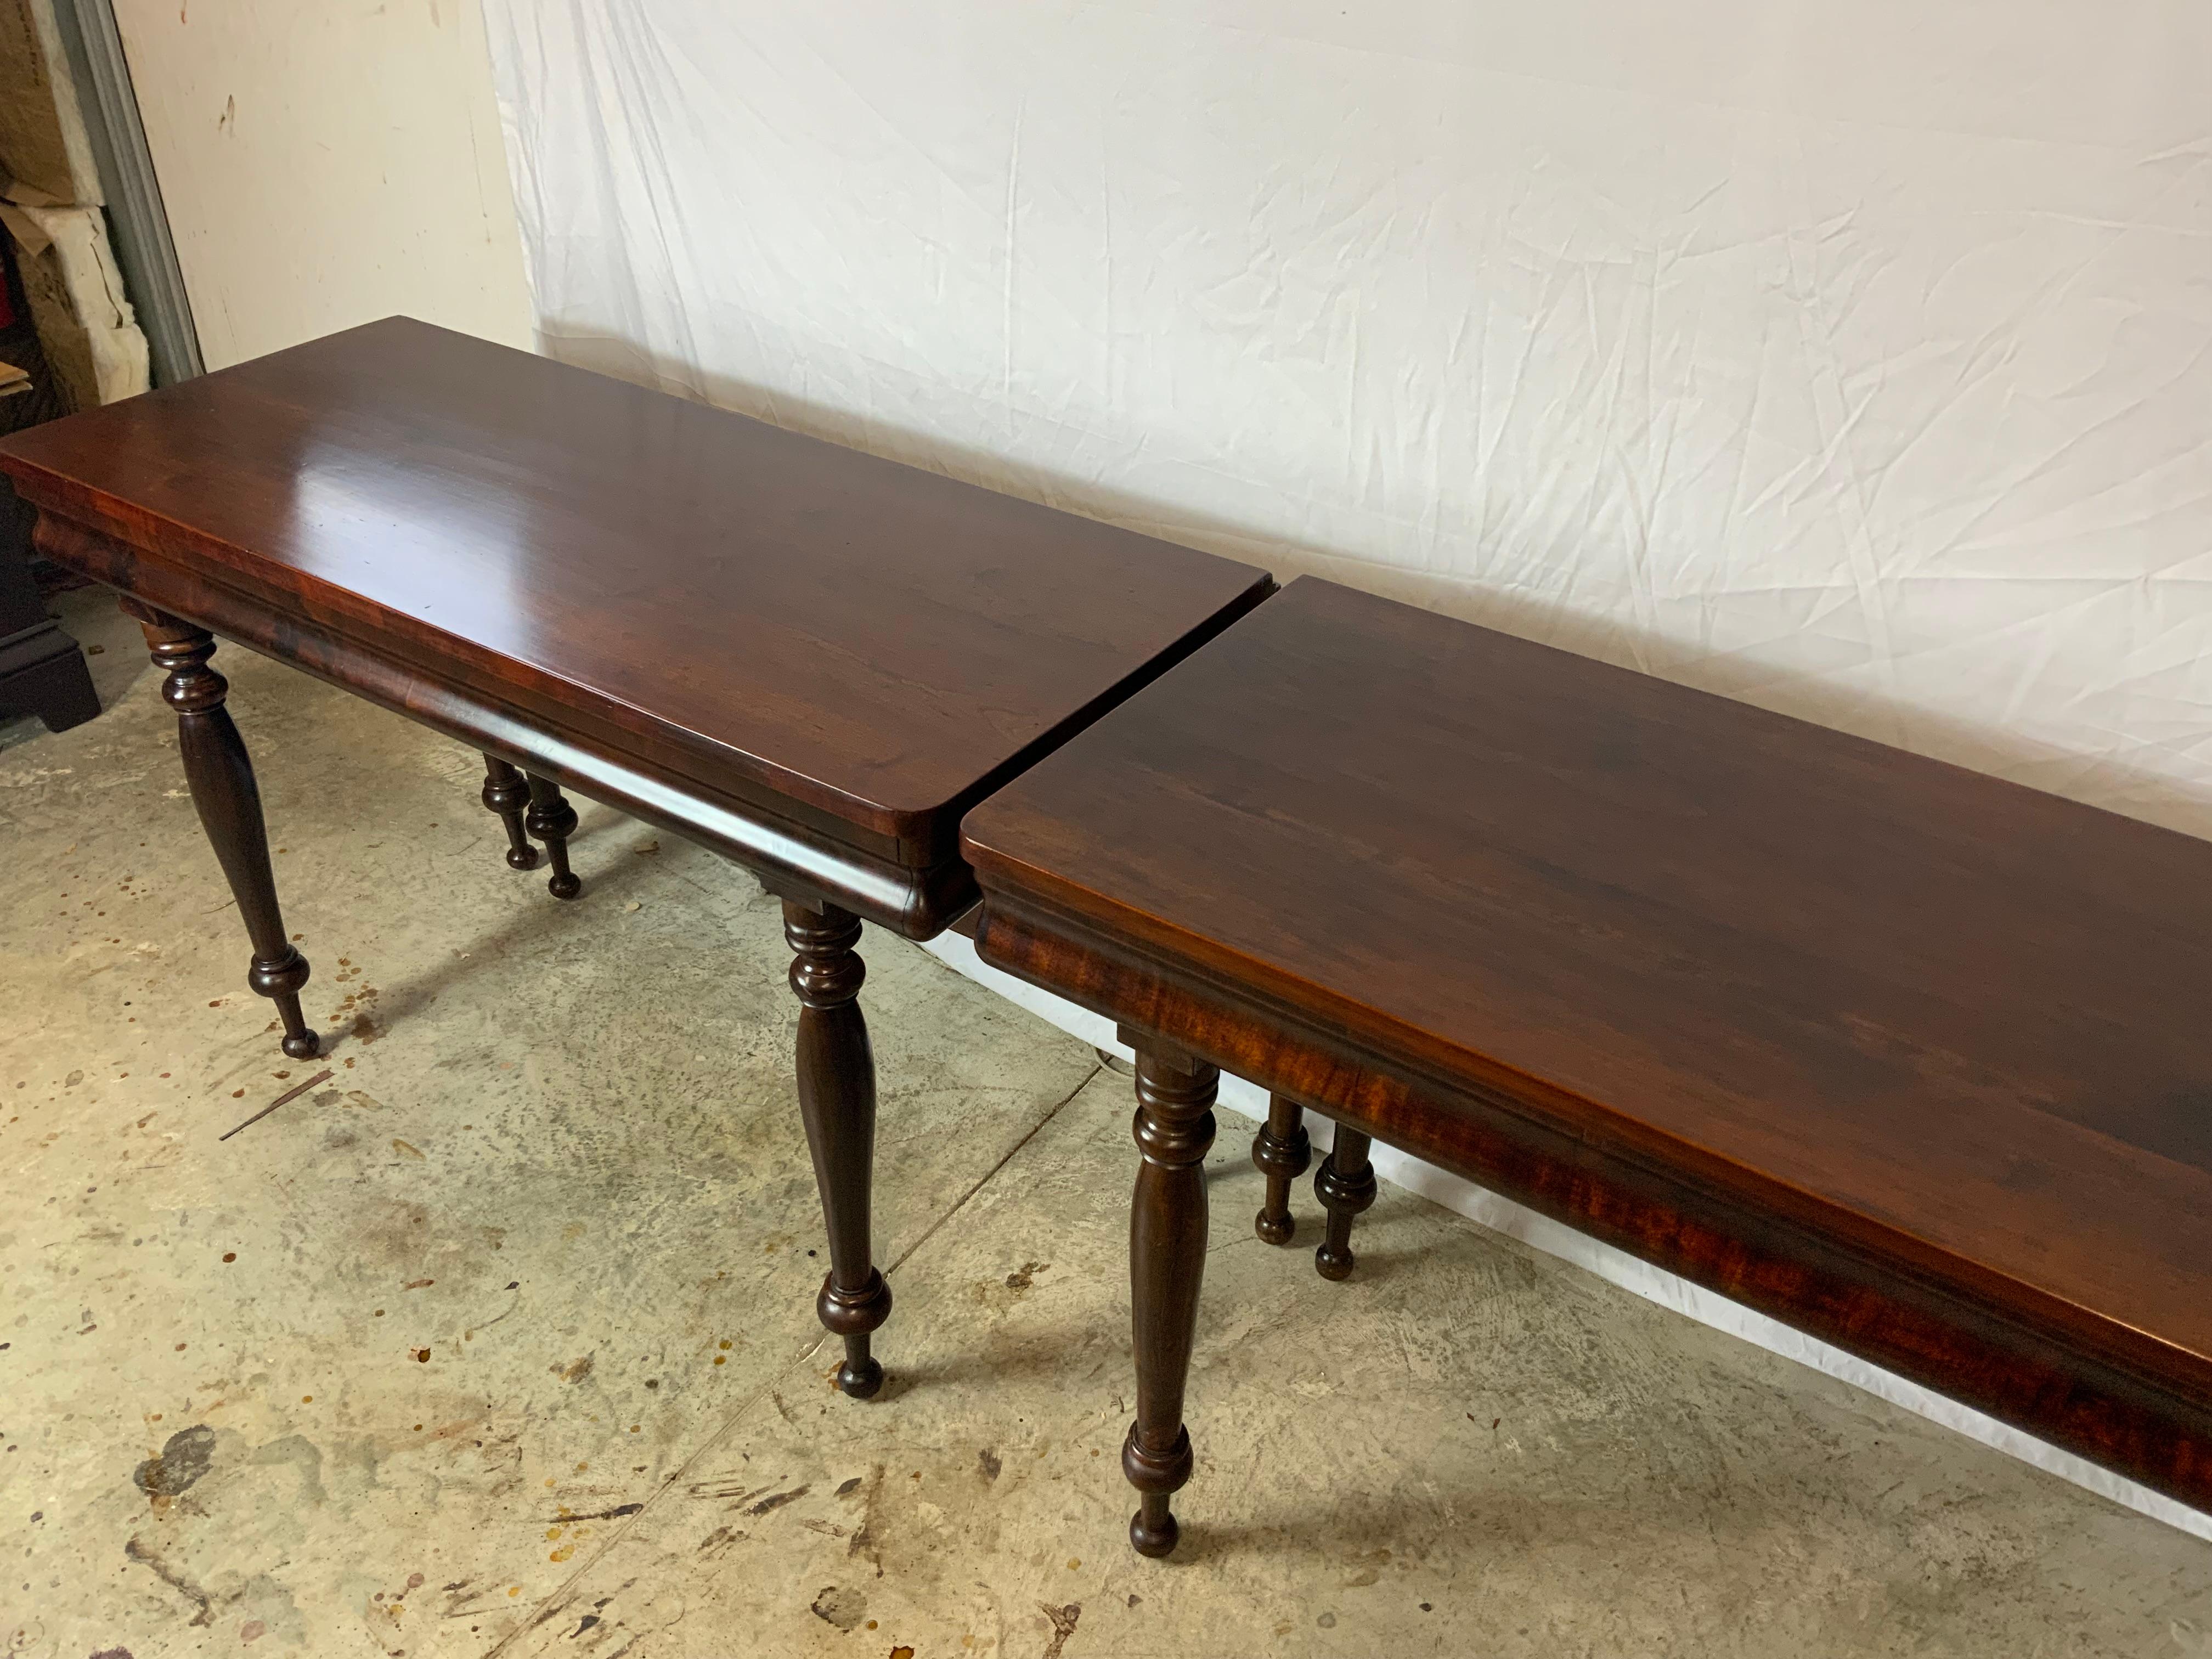 A nice wide mid 19th century Sheraton two part banquet table with solid Cherry tops and legs with Mahogany veneered ogee aprons on the fronts. A fifth swing leg holds the drop leaf tops that are held tightly together with table yokes. Very nice